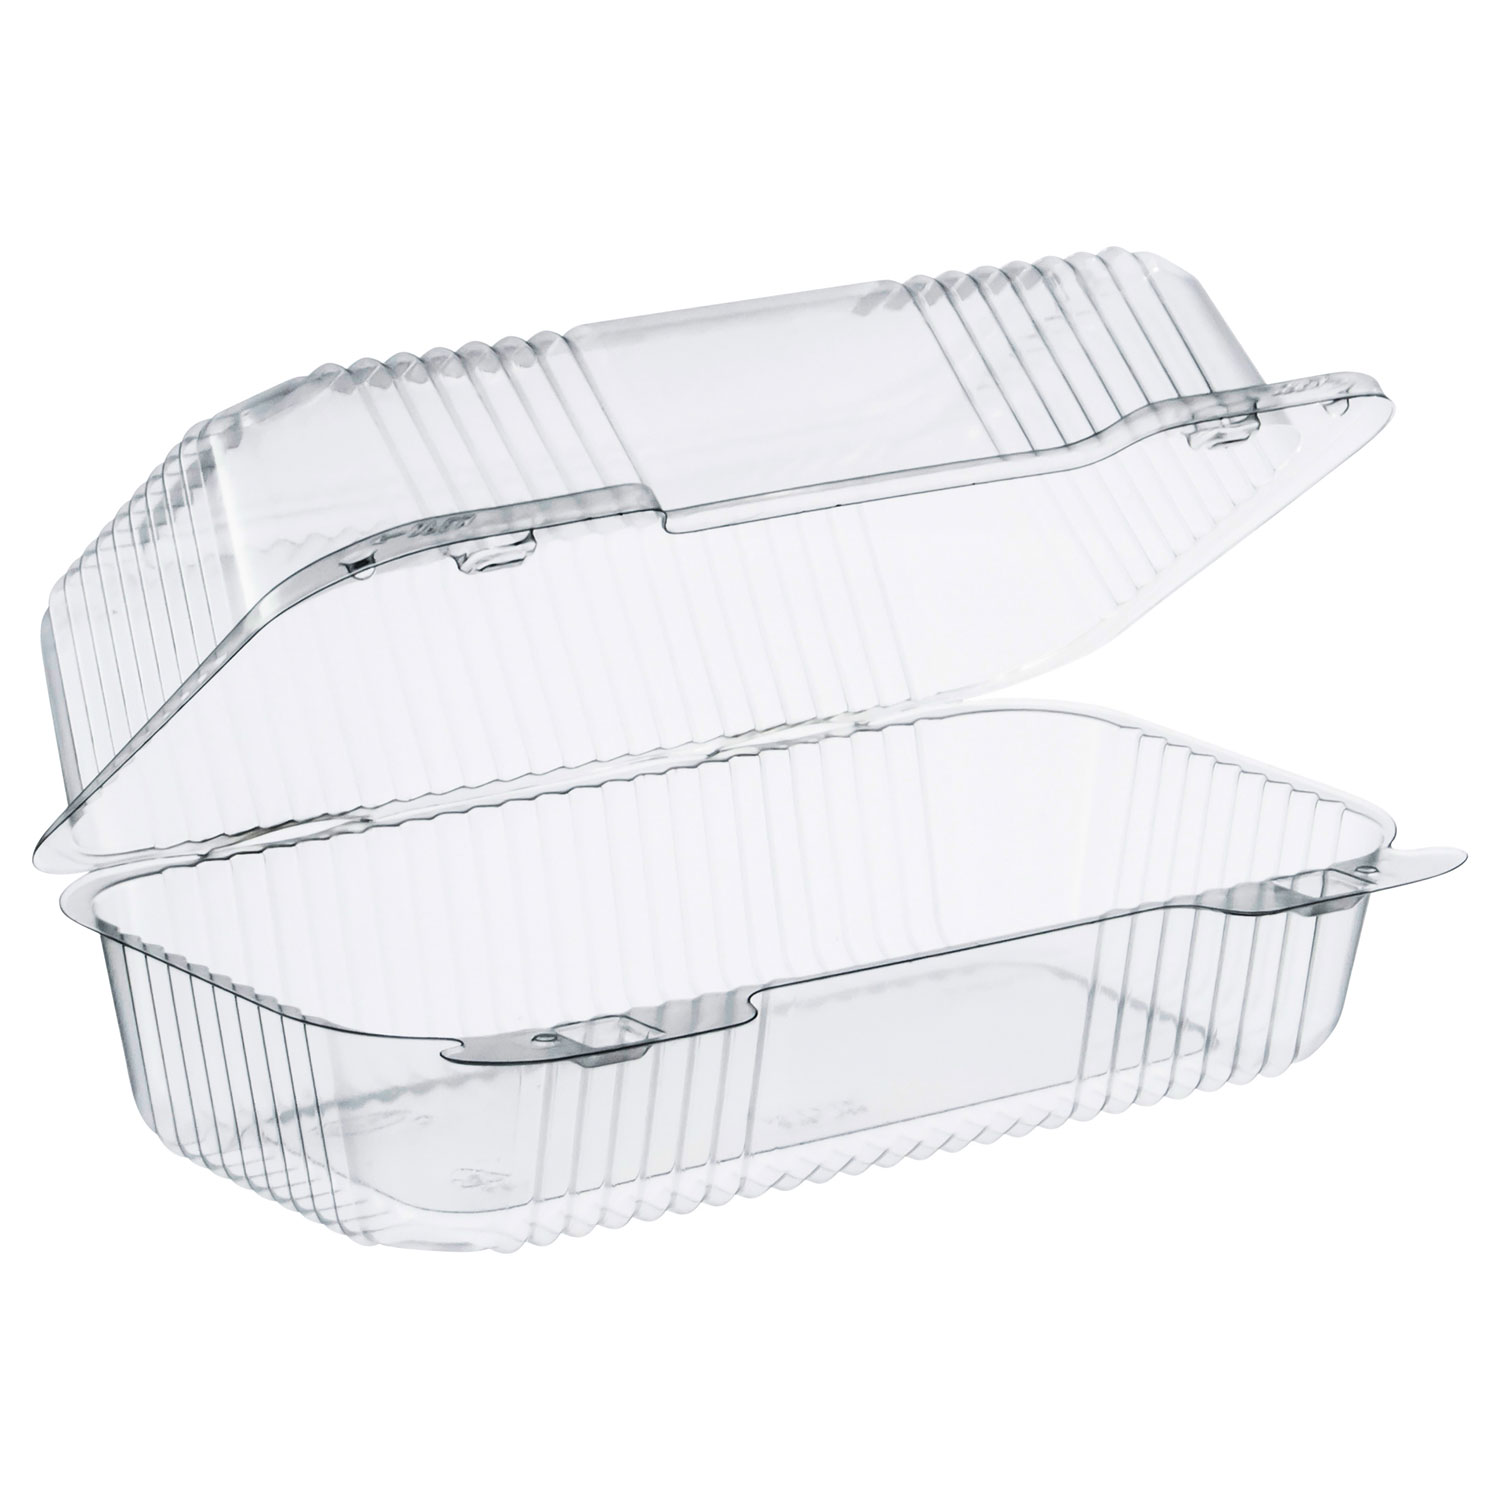 Dart 90HT1R Foam Hinged Lid Containers, 9 x 9 x 3, White, 200/Carton